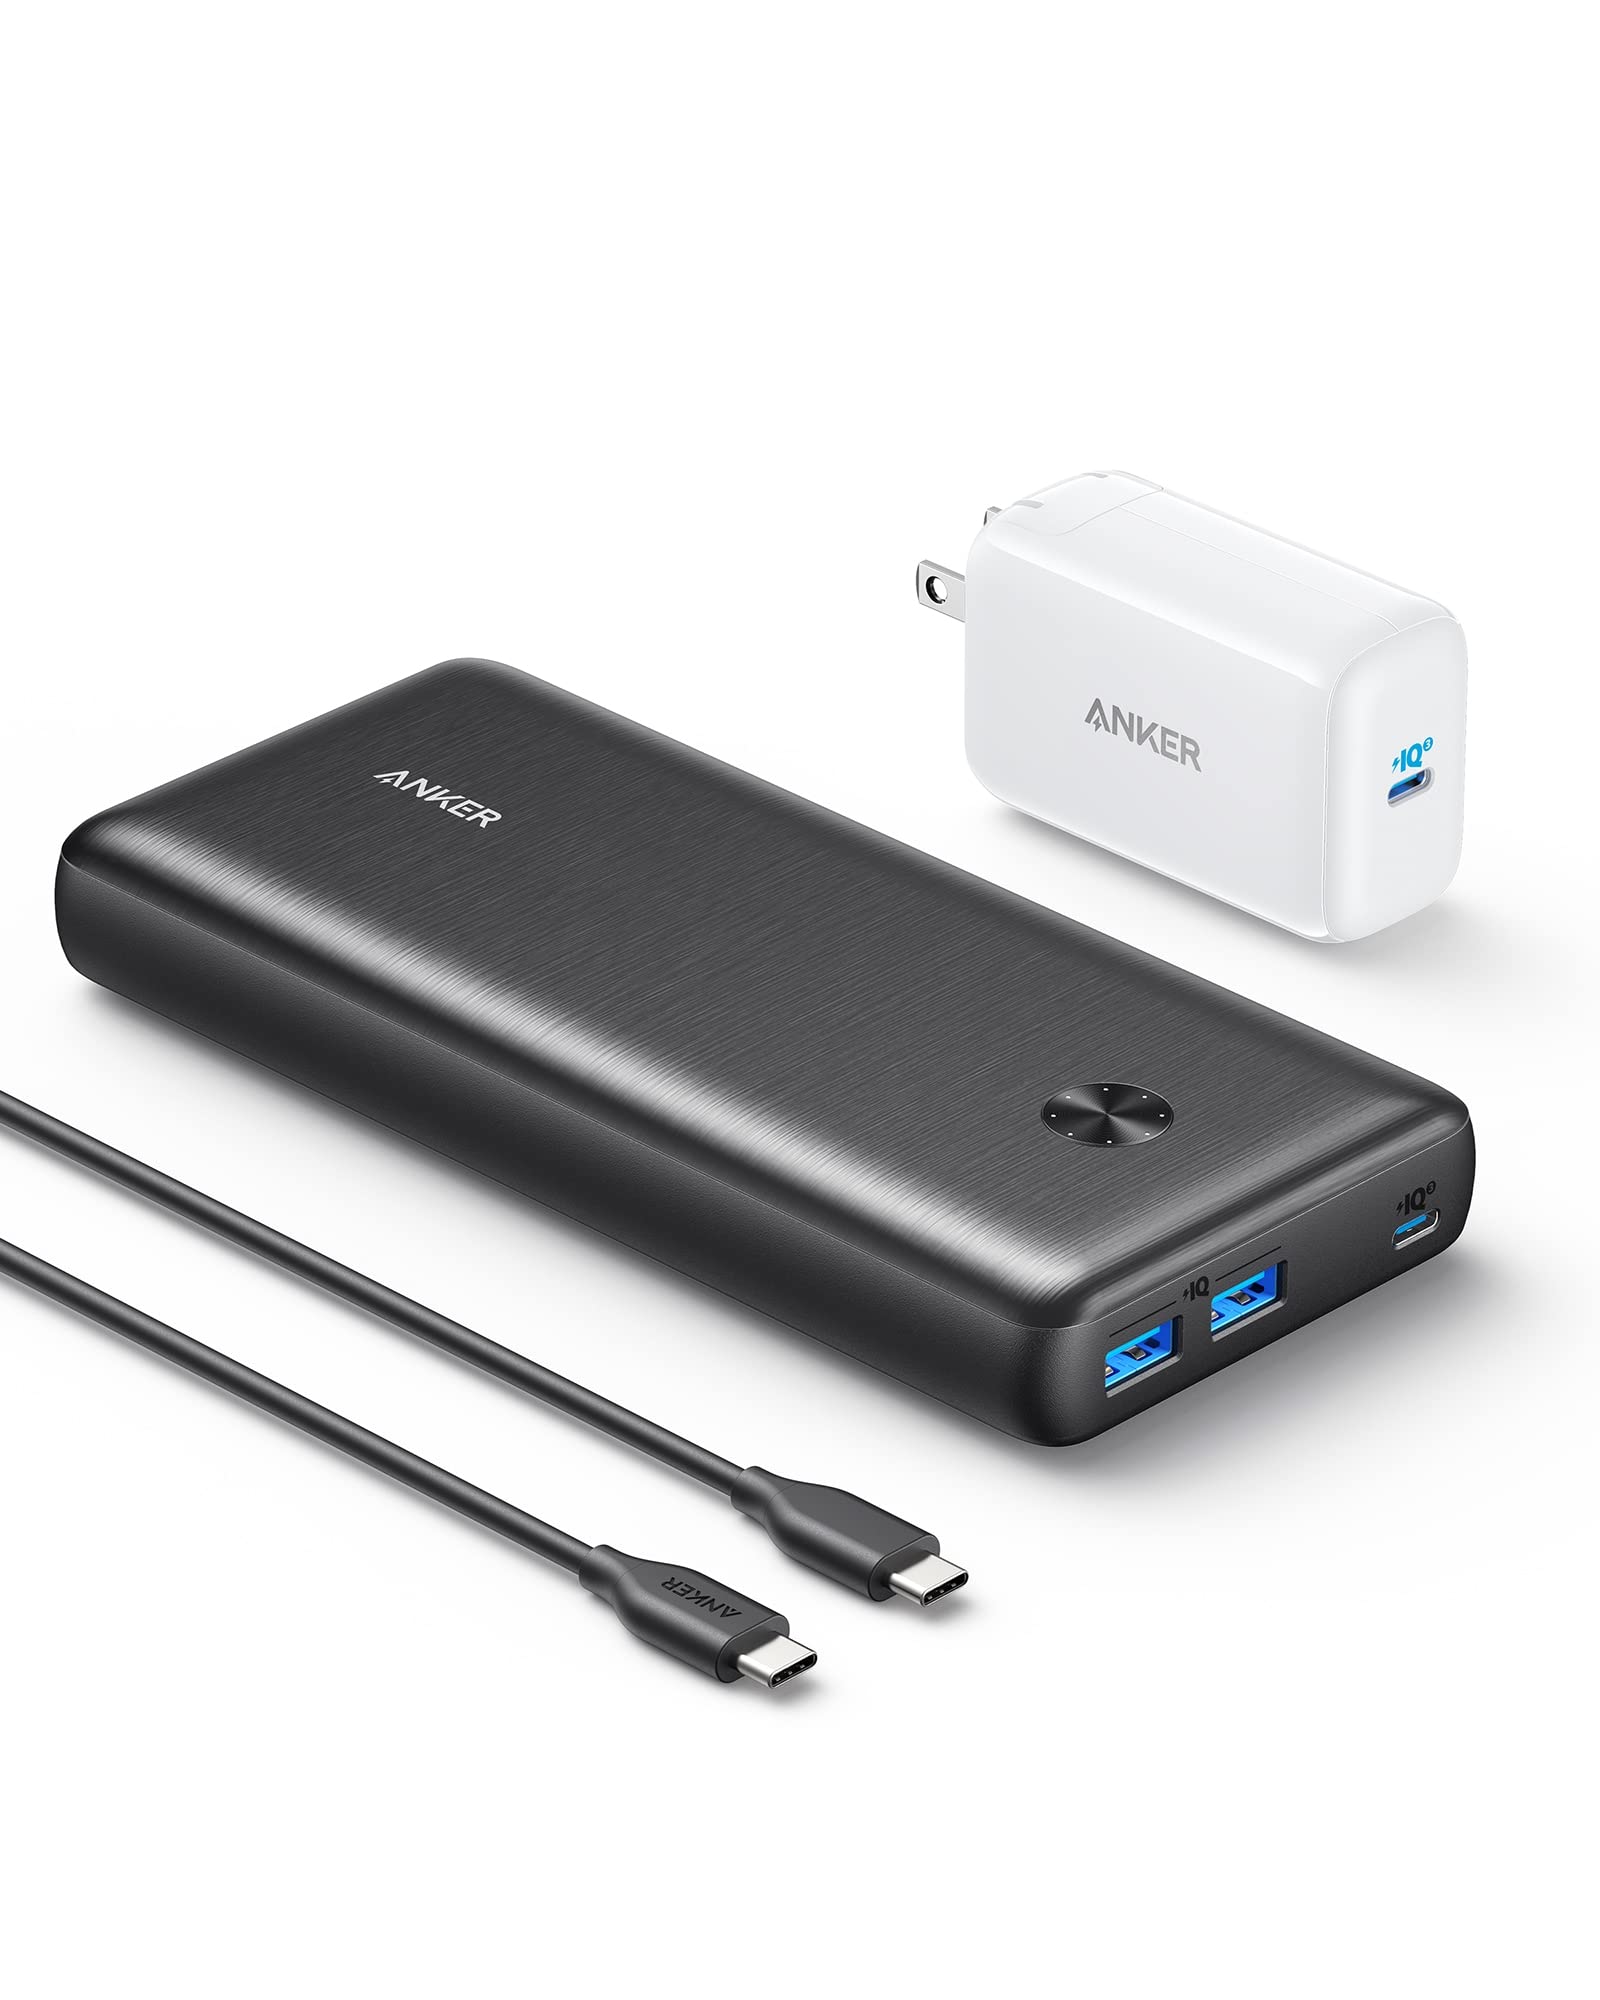 Anker 25600mAh PowerCore III Elite Portable Power Bank w/ 65W Wall Charger $60 + Free Shipping